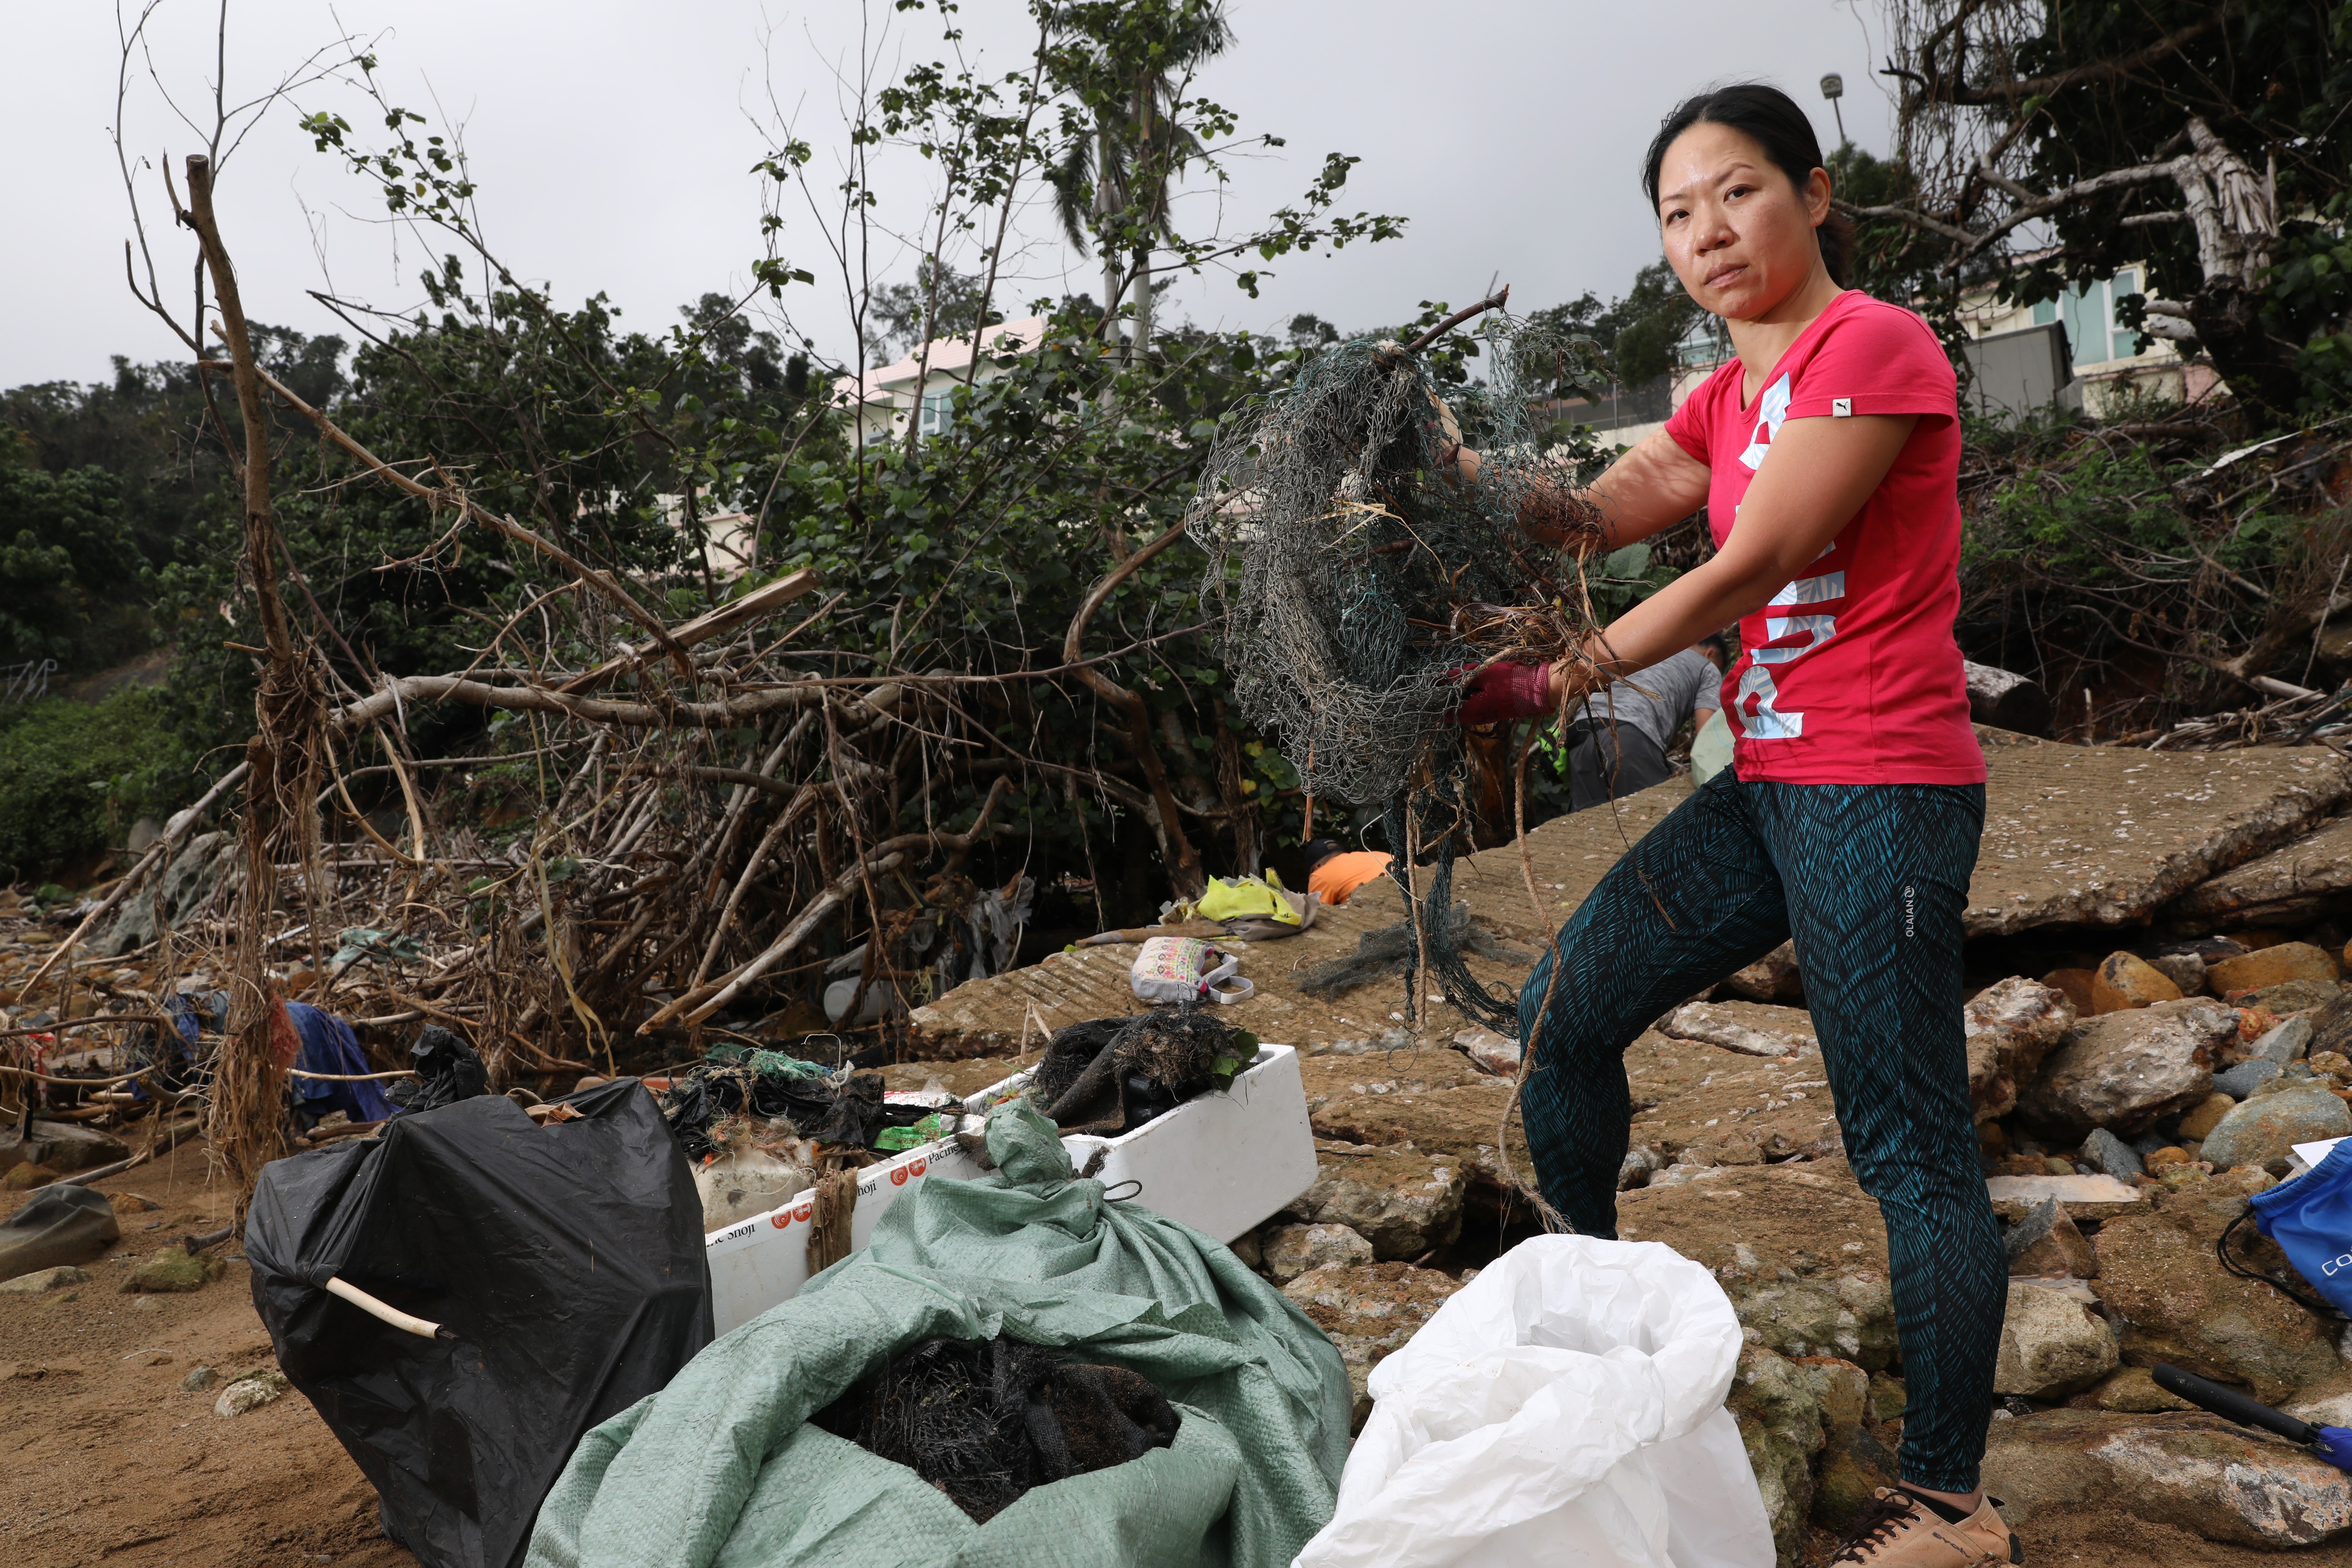 Kitti Chan has held several clean-up operations with volunteers joining her quest to rid Hong Kong’s beaches and waters of rubbish. Photo: K. Y. Cheng